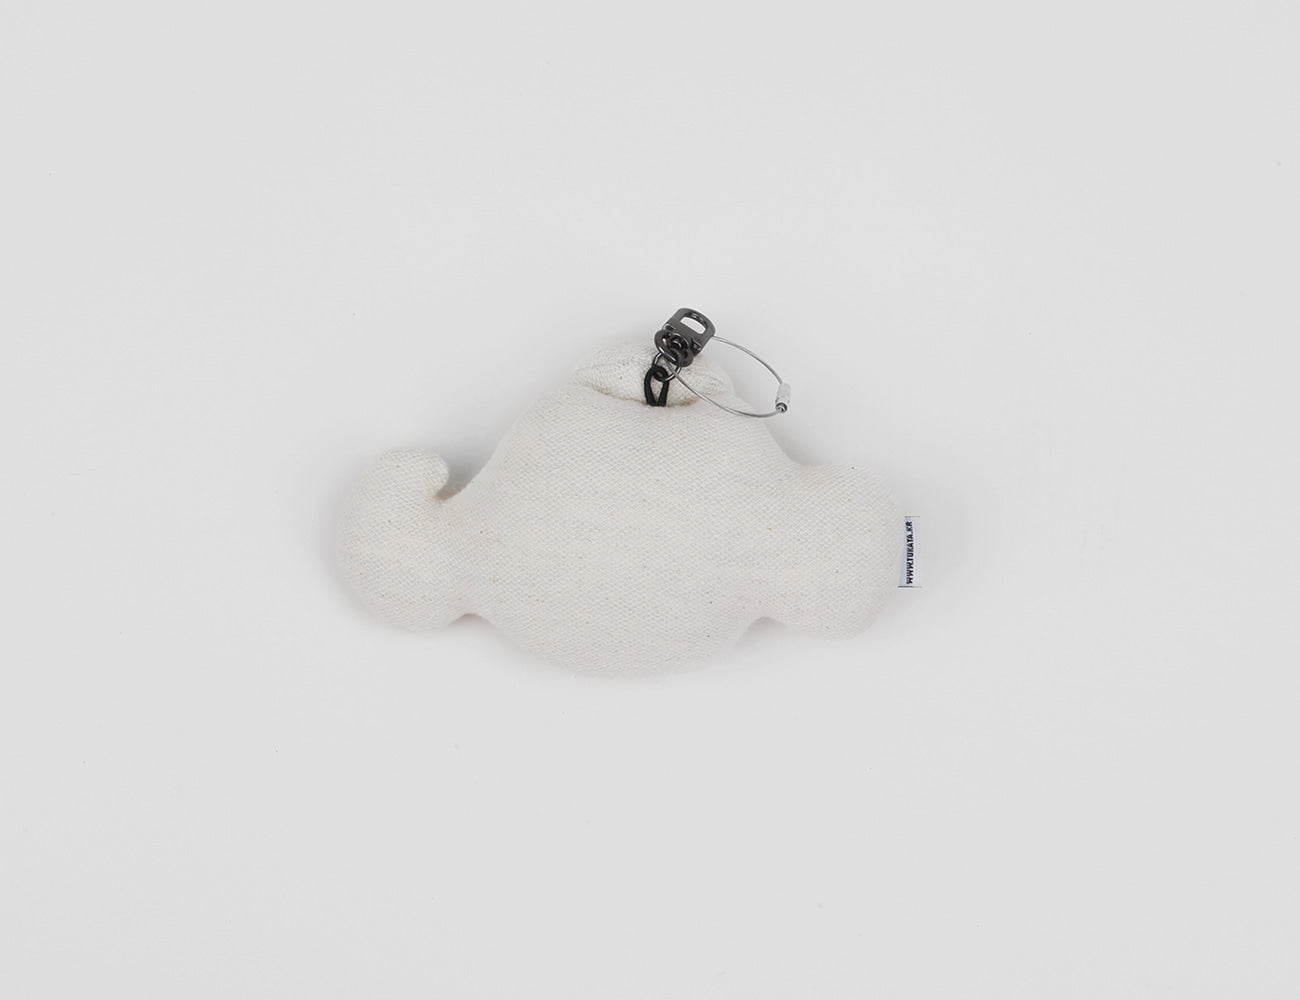 woon (small) doll key-ring